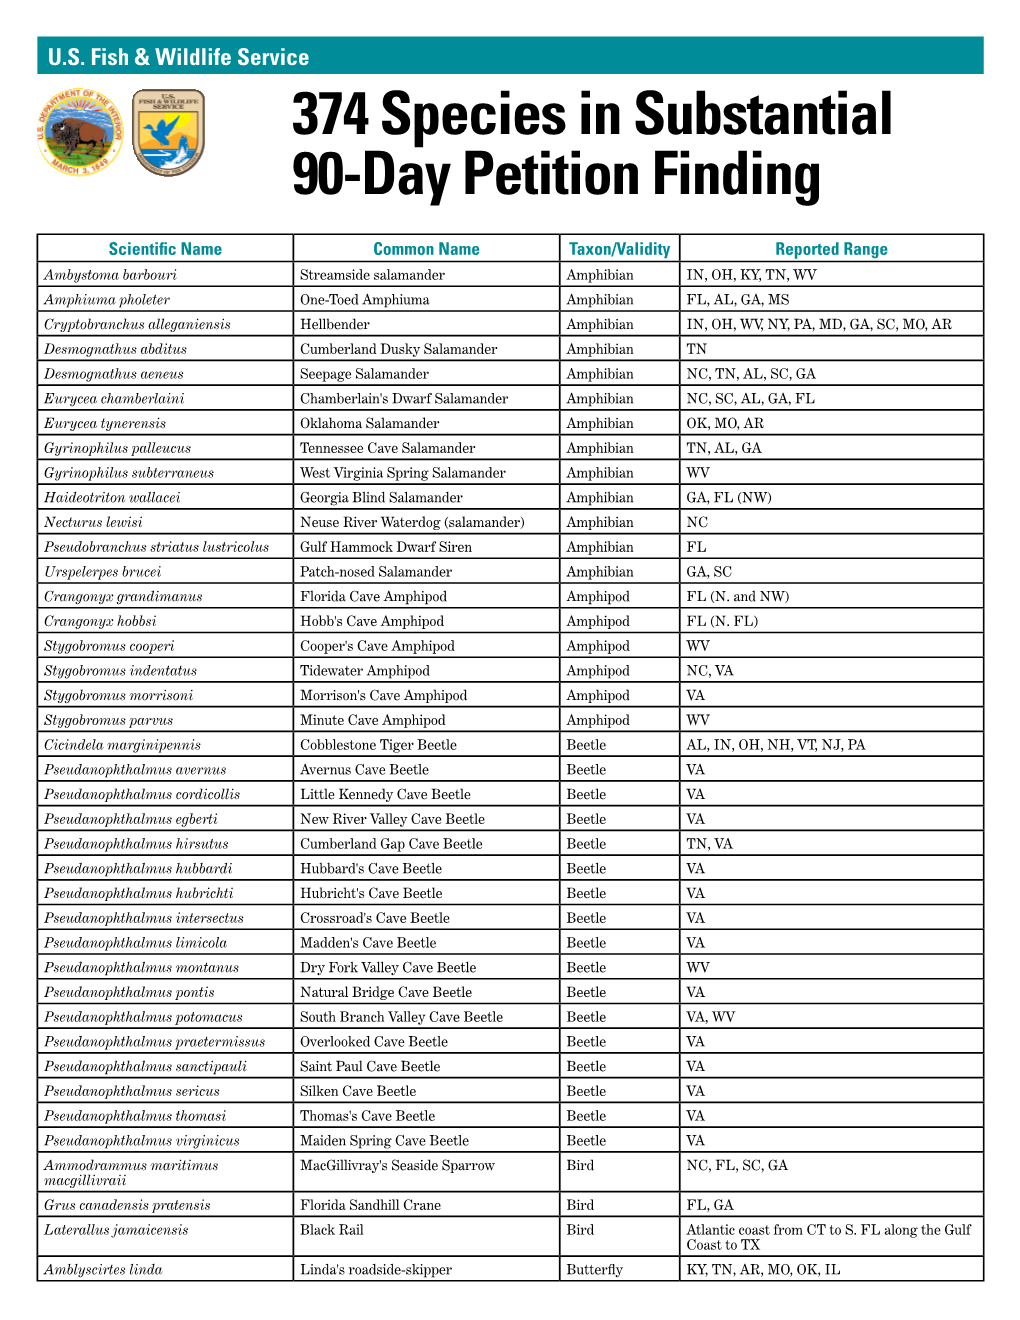 374 Species in Substantial 90-Day Petition Finding